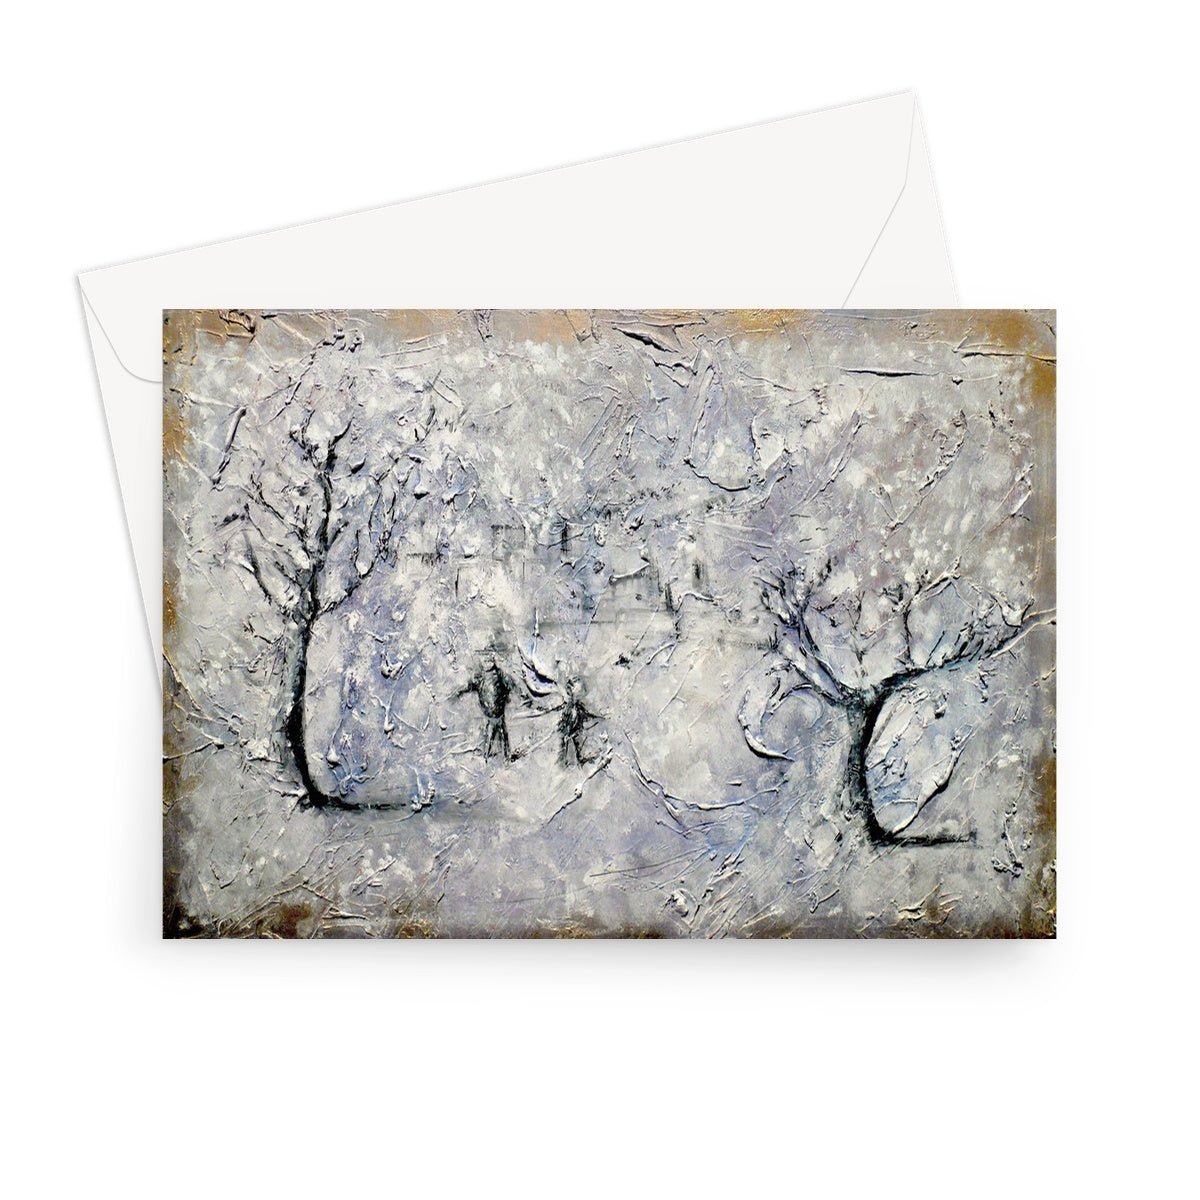 Father Daughter Snow Art Gifts Greeting Card-Greetings Cards-Abstract & Impressionistic Art Gallery-7"x5"-10 Cards-Paintings, Prints, Homeware, Art Gifts From Scotland By Scottish Artist Kevin Hunter